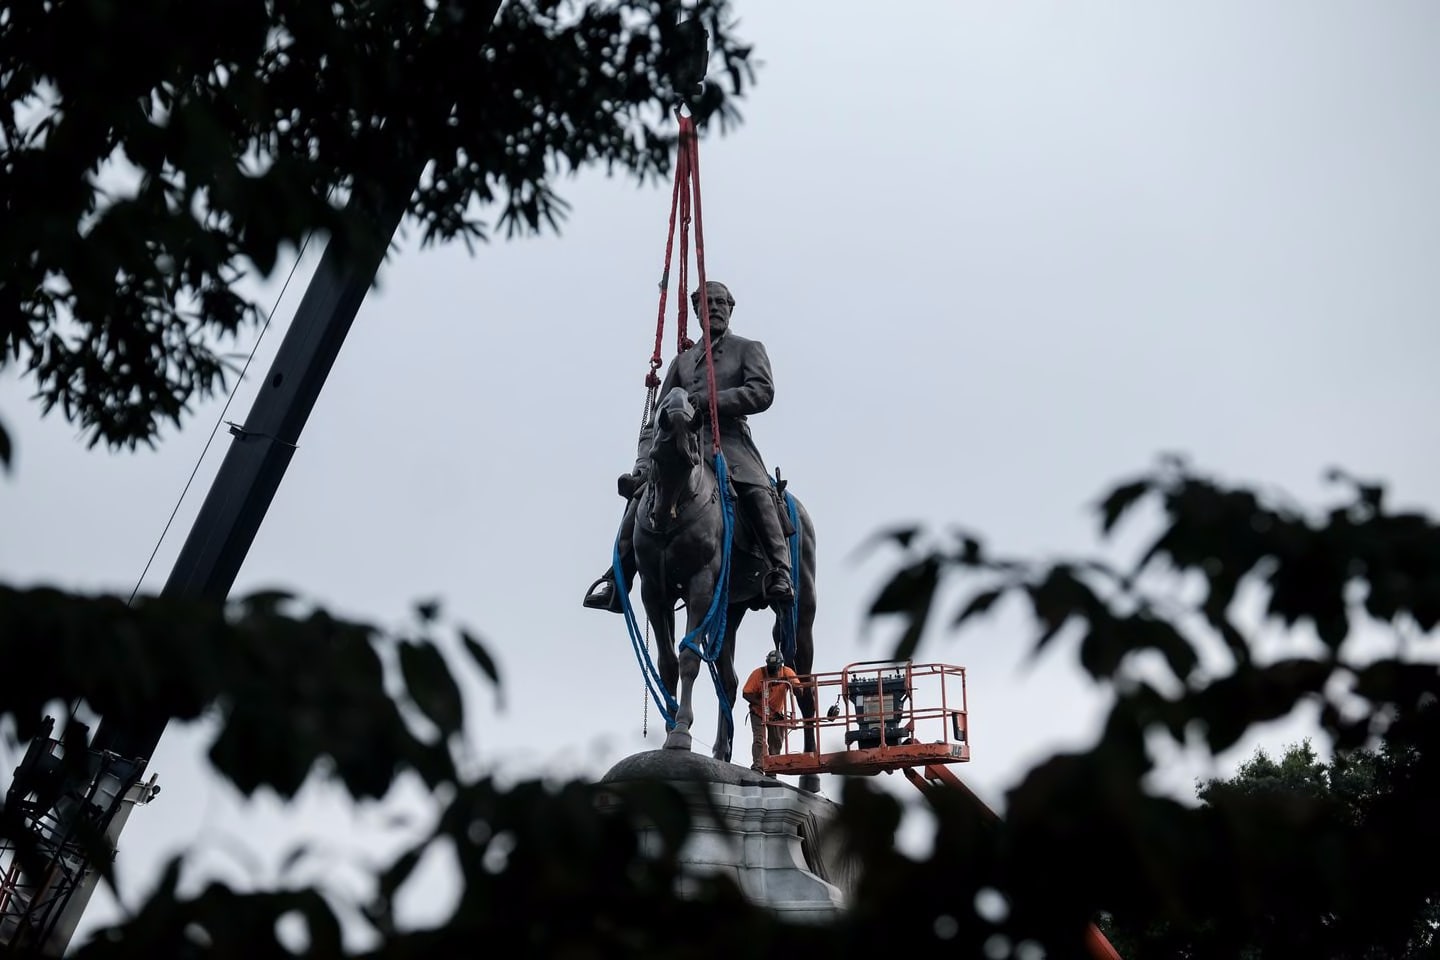 The statue of Robert E. Lee before being removed from its pedestal in Richmond, Va., on Wednesday morning, Sept. 8, 2021. The Confederate memorial was erected in 1890, the first of six monuments that became symbols of white power along the main boulevard in Richmond. (Michael A. McCoy/The New York Times)